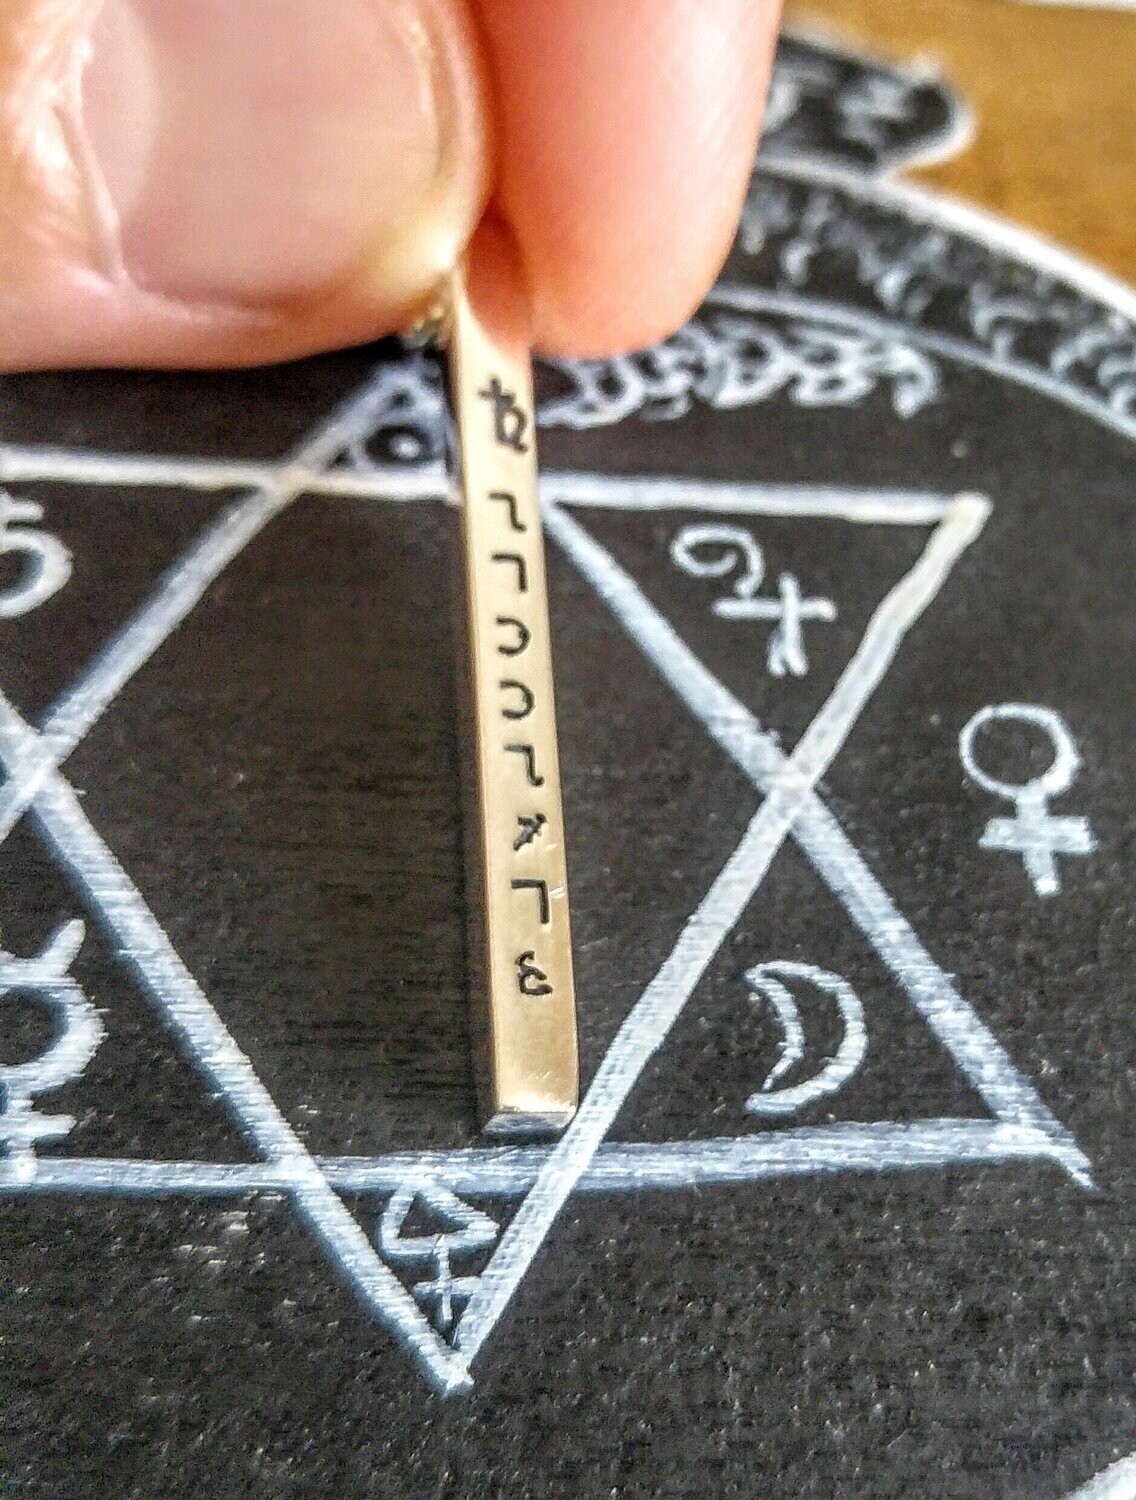 Alchemy necklace your name in the Angels language Enochian witchcraft